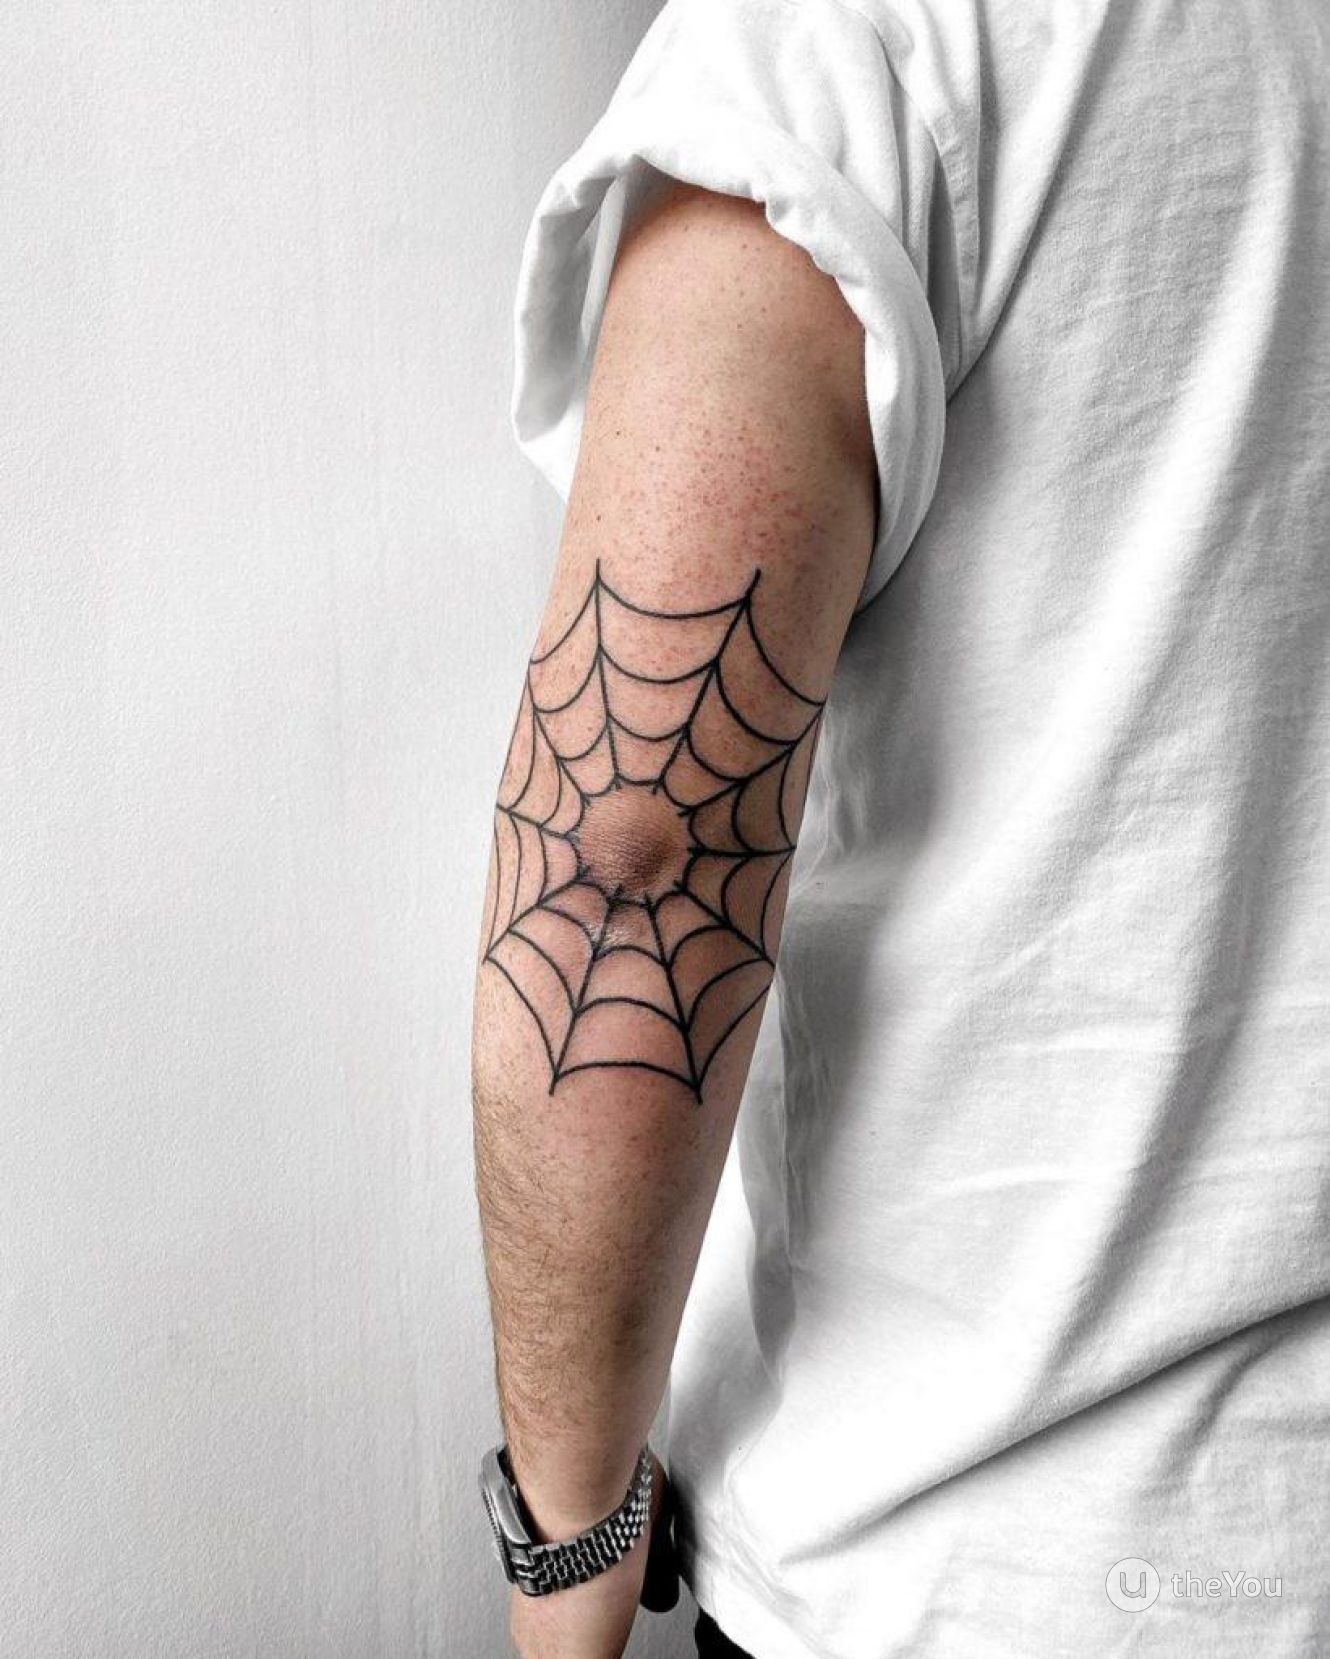 Nothing wrong with a spider web elbow 🕸 : r/traditionaltattoos